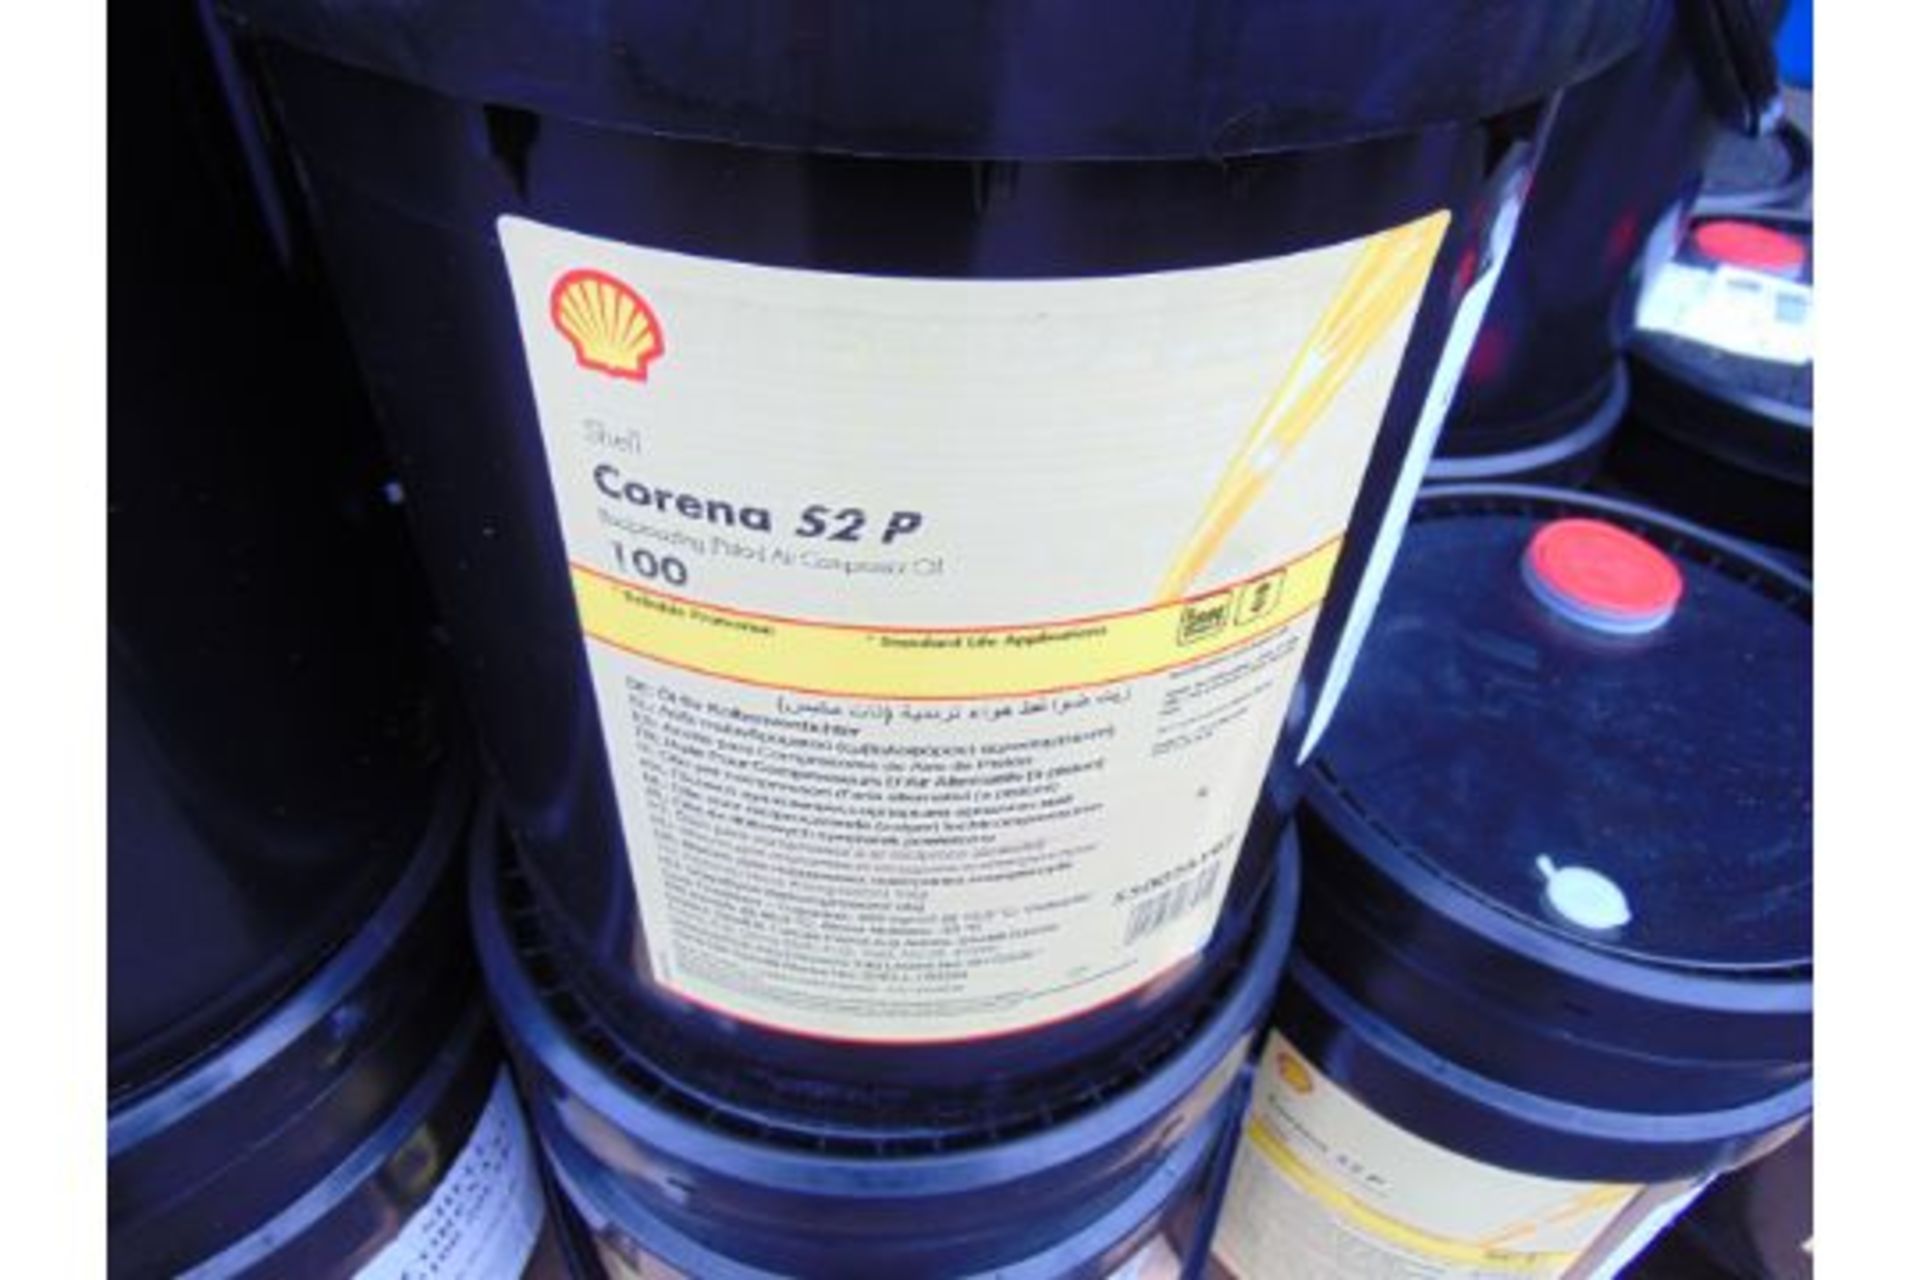 19 x 20 Litre Drums of Shell Corena S2 P100 High Quality Lubricating Oil - Image 2 of 5